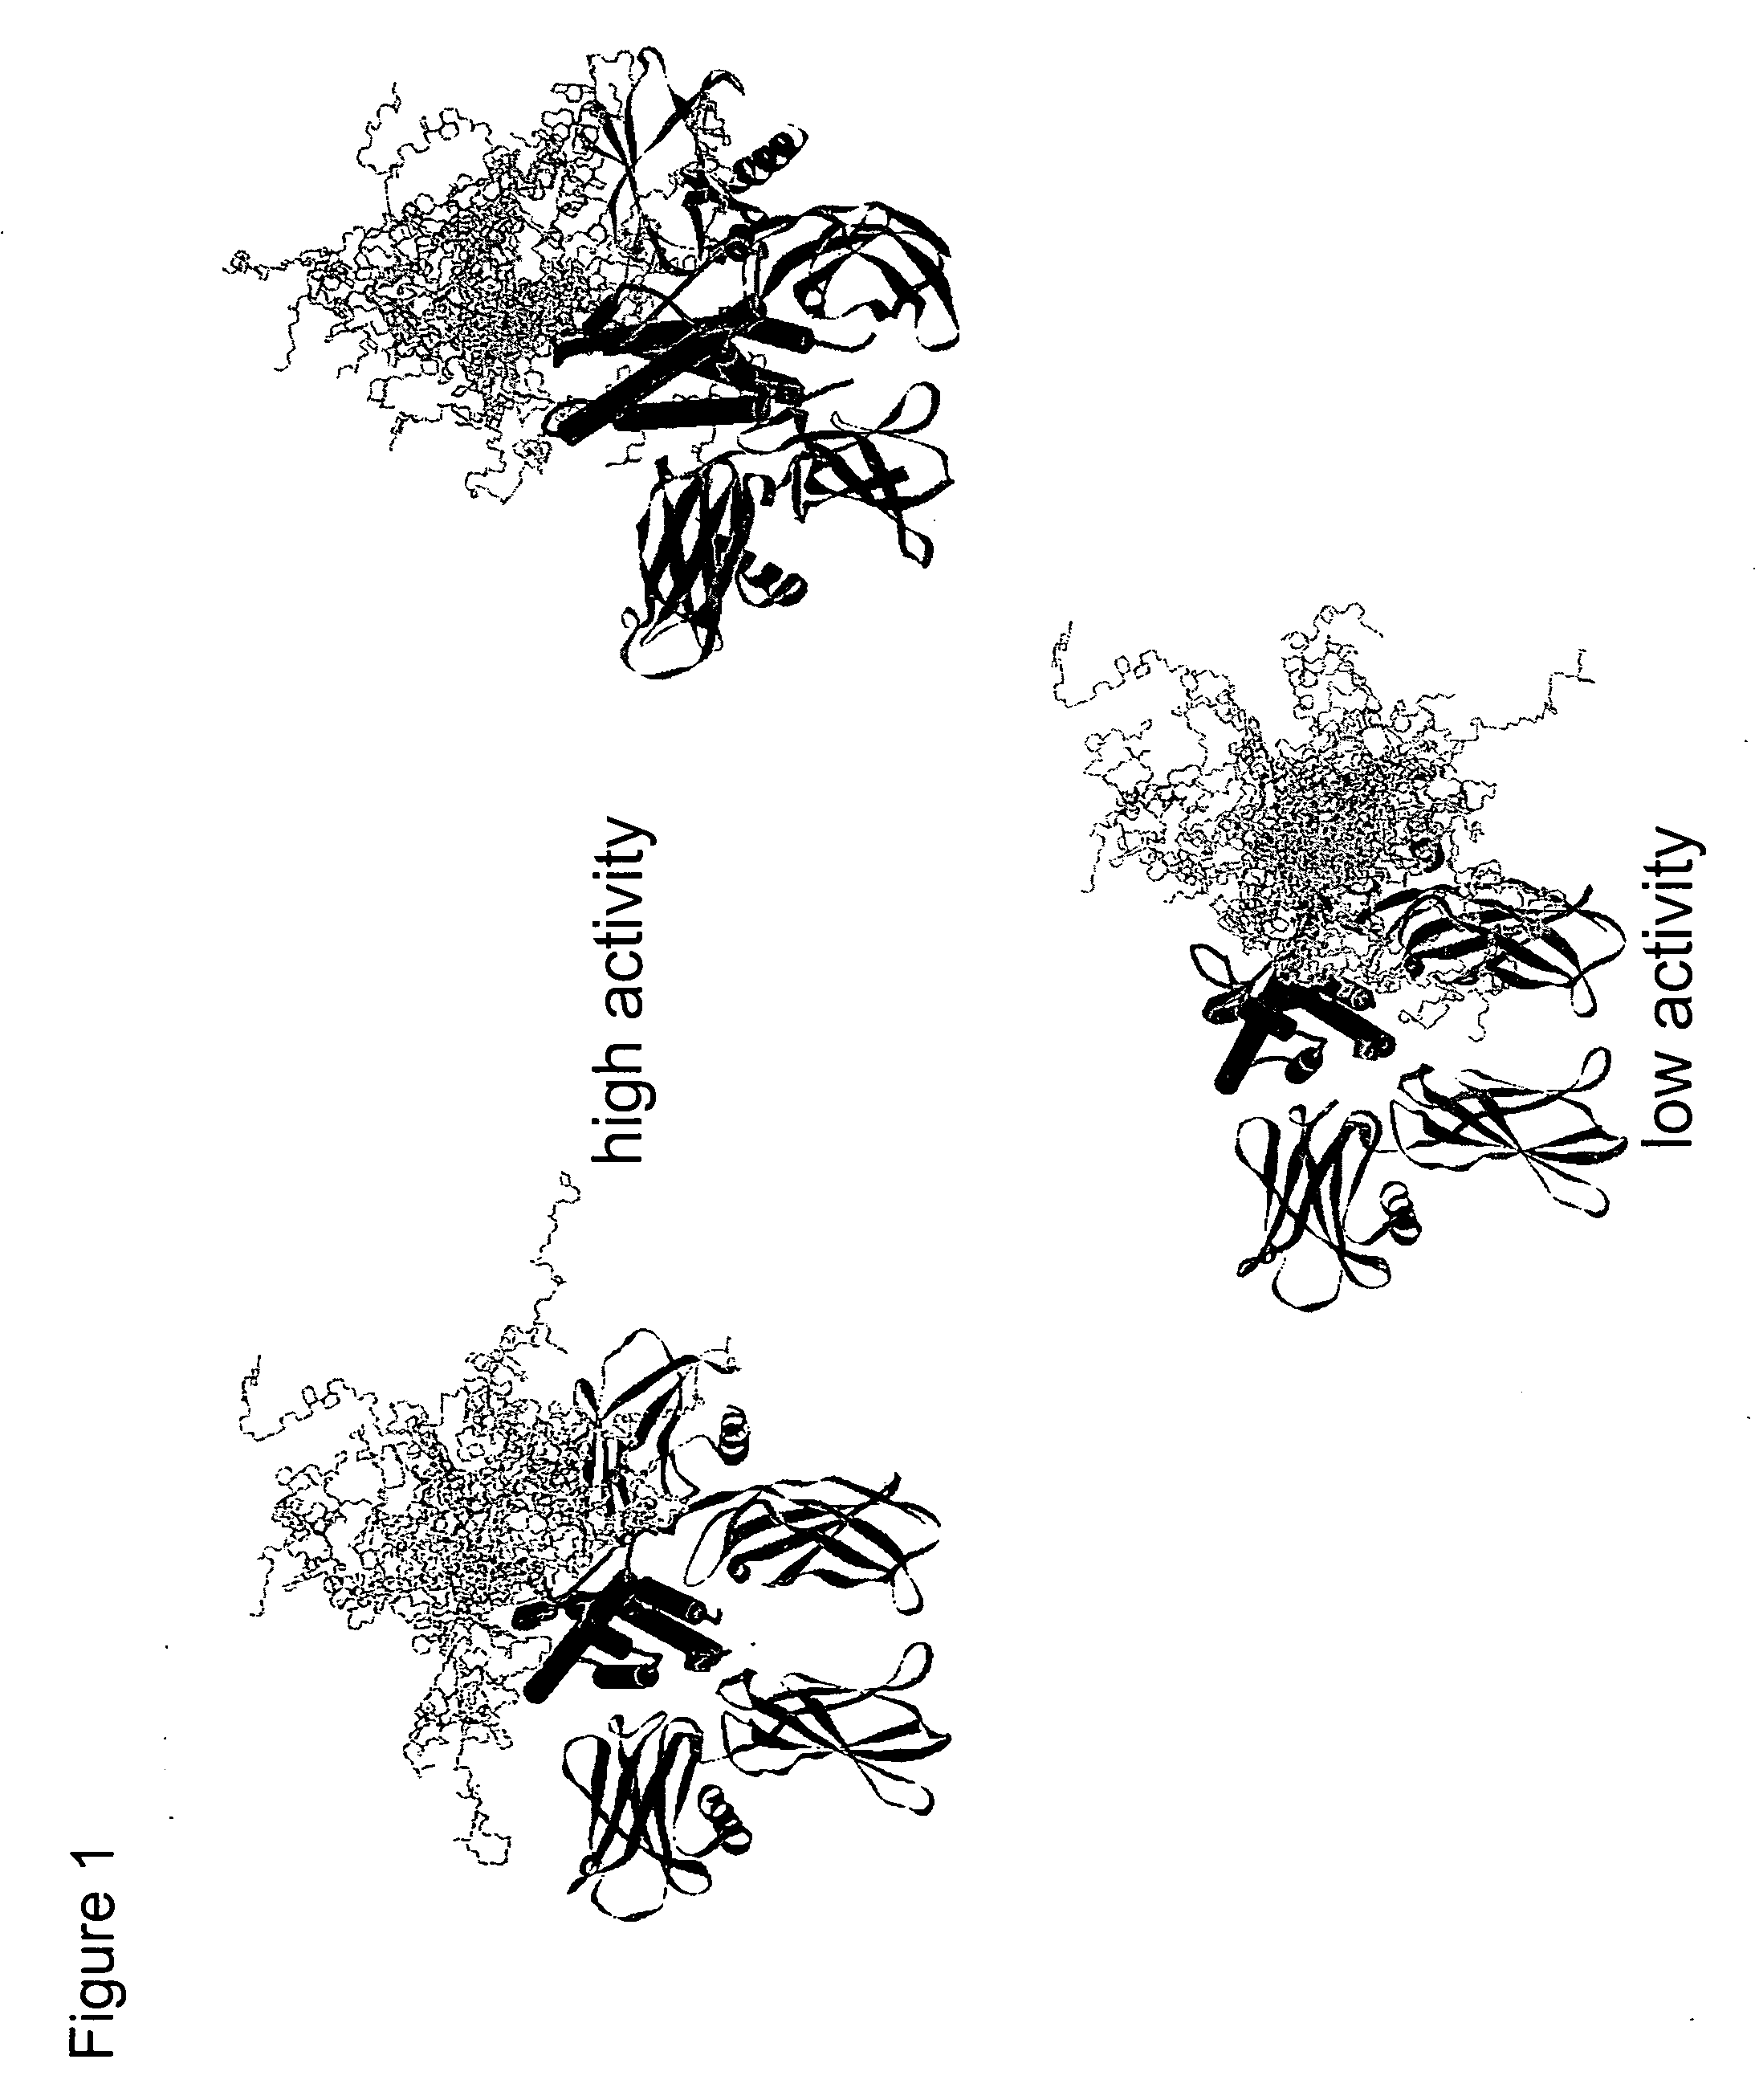 Methods for rational pegylation of proteins